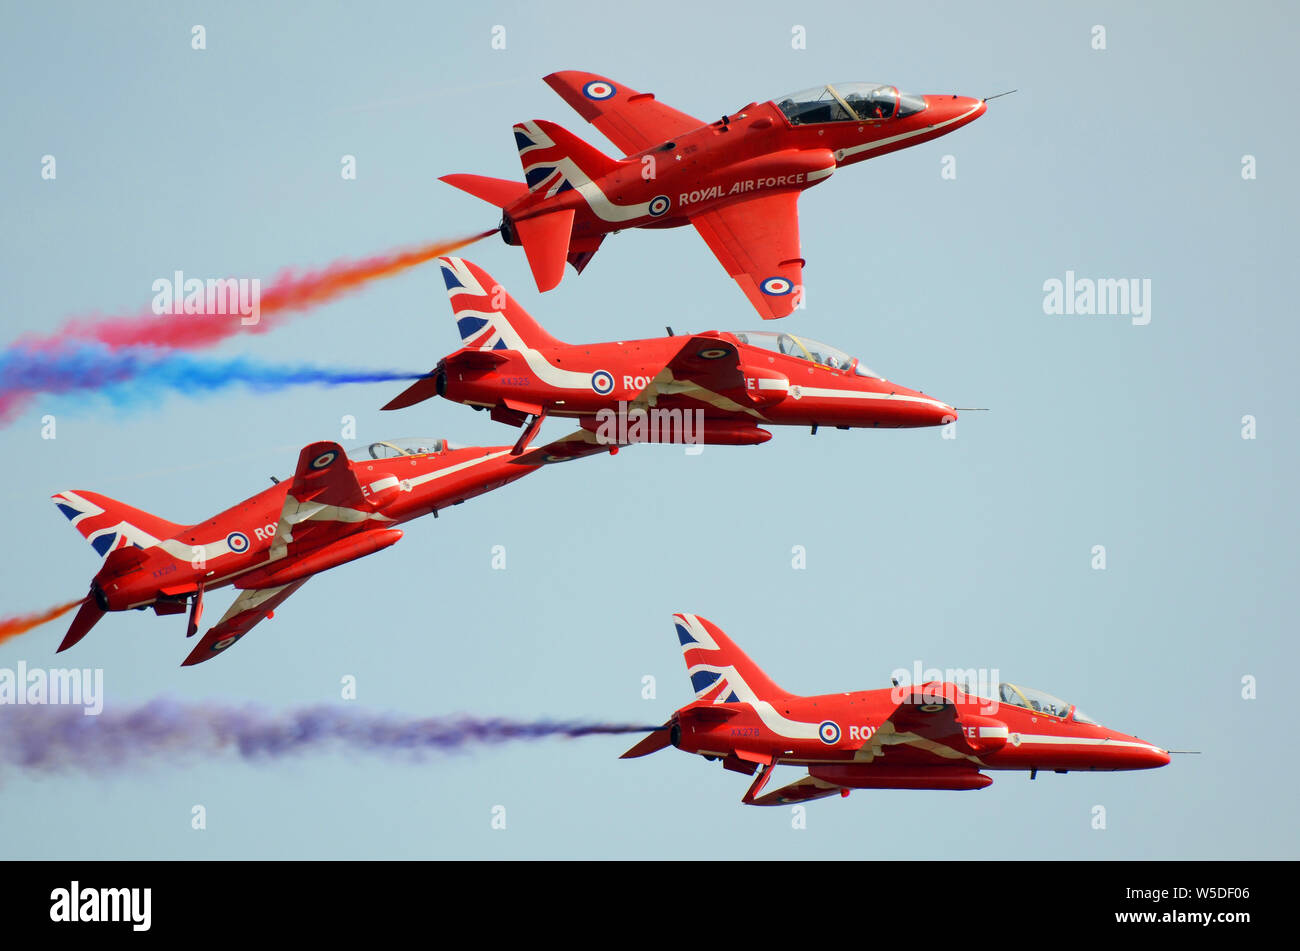 Royal Air Force Red Arrows RAF aerobatic display team the Red Arrows performing their Roll Backs at an airshow in their BAe Hawk jet planes Stock Photo